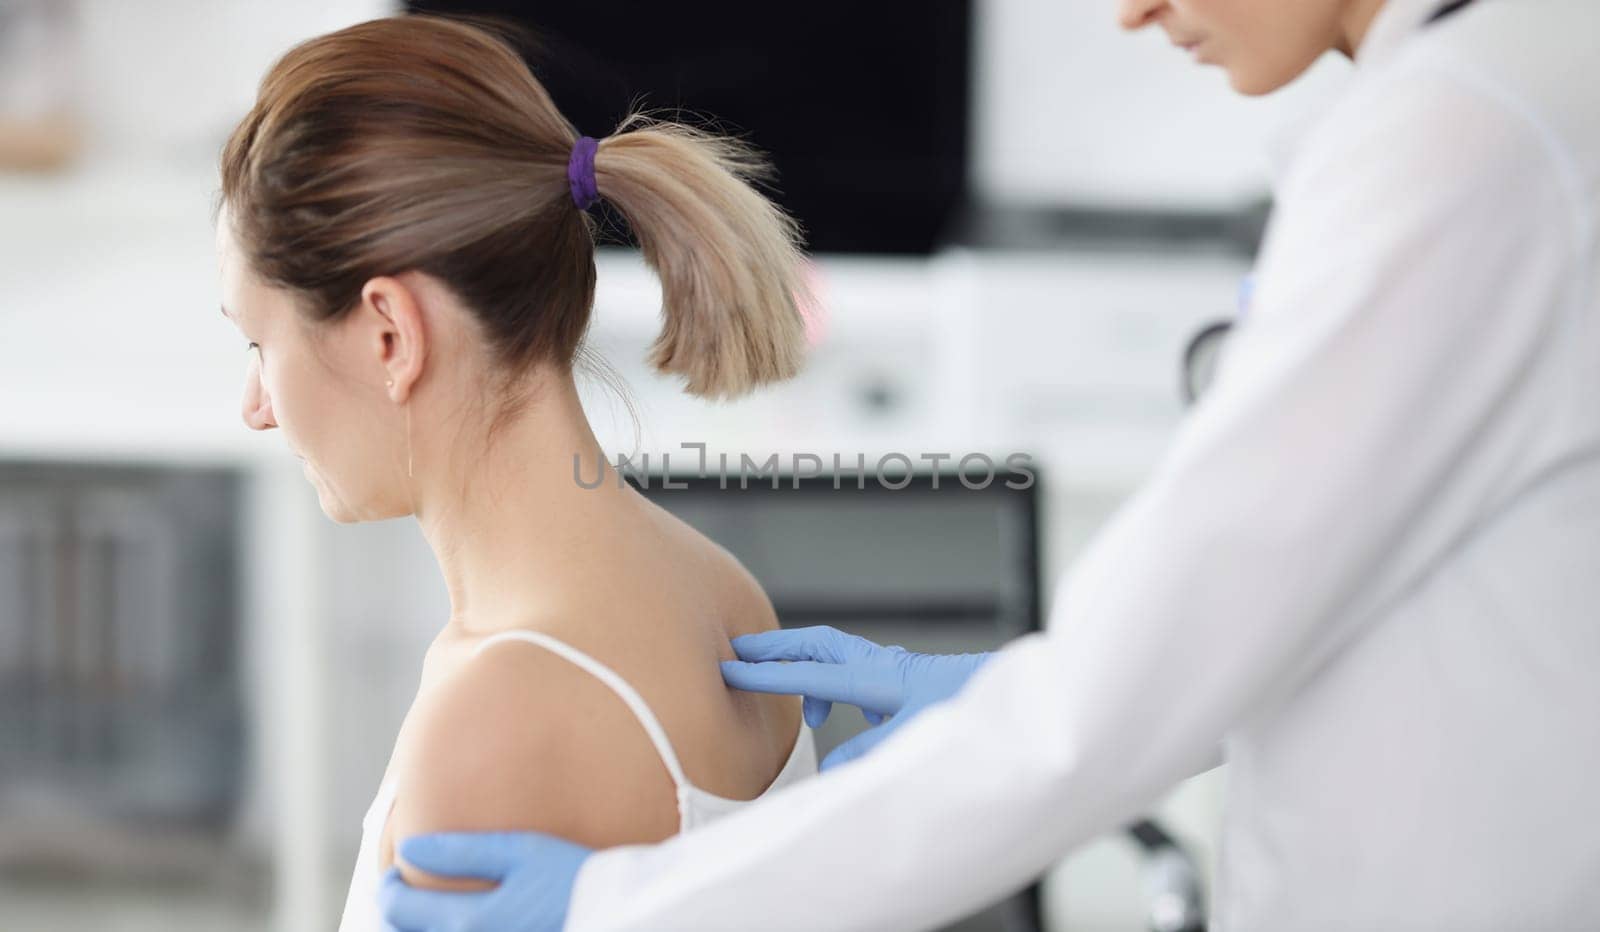 Doctor examines patient's spine in medical office. Spine disease symptoms and treatment concept